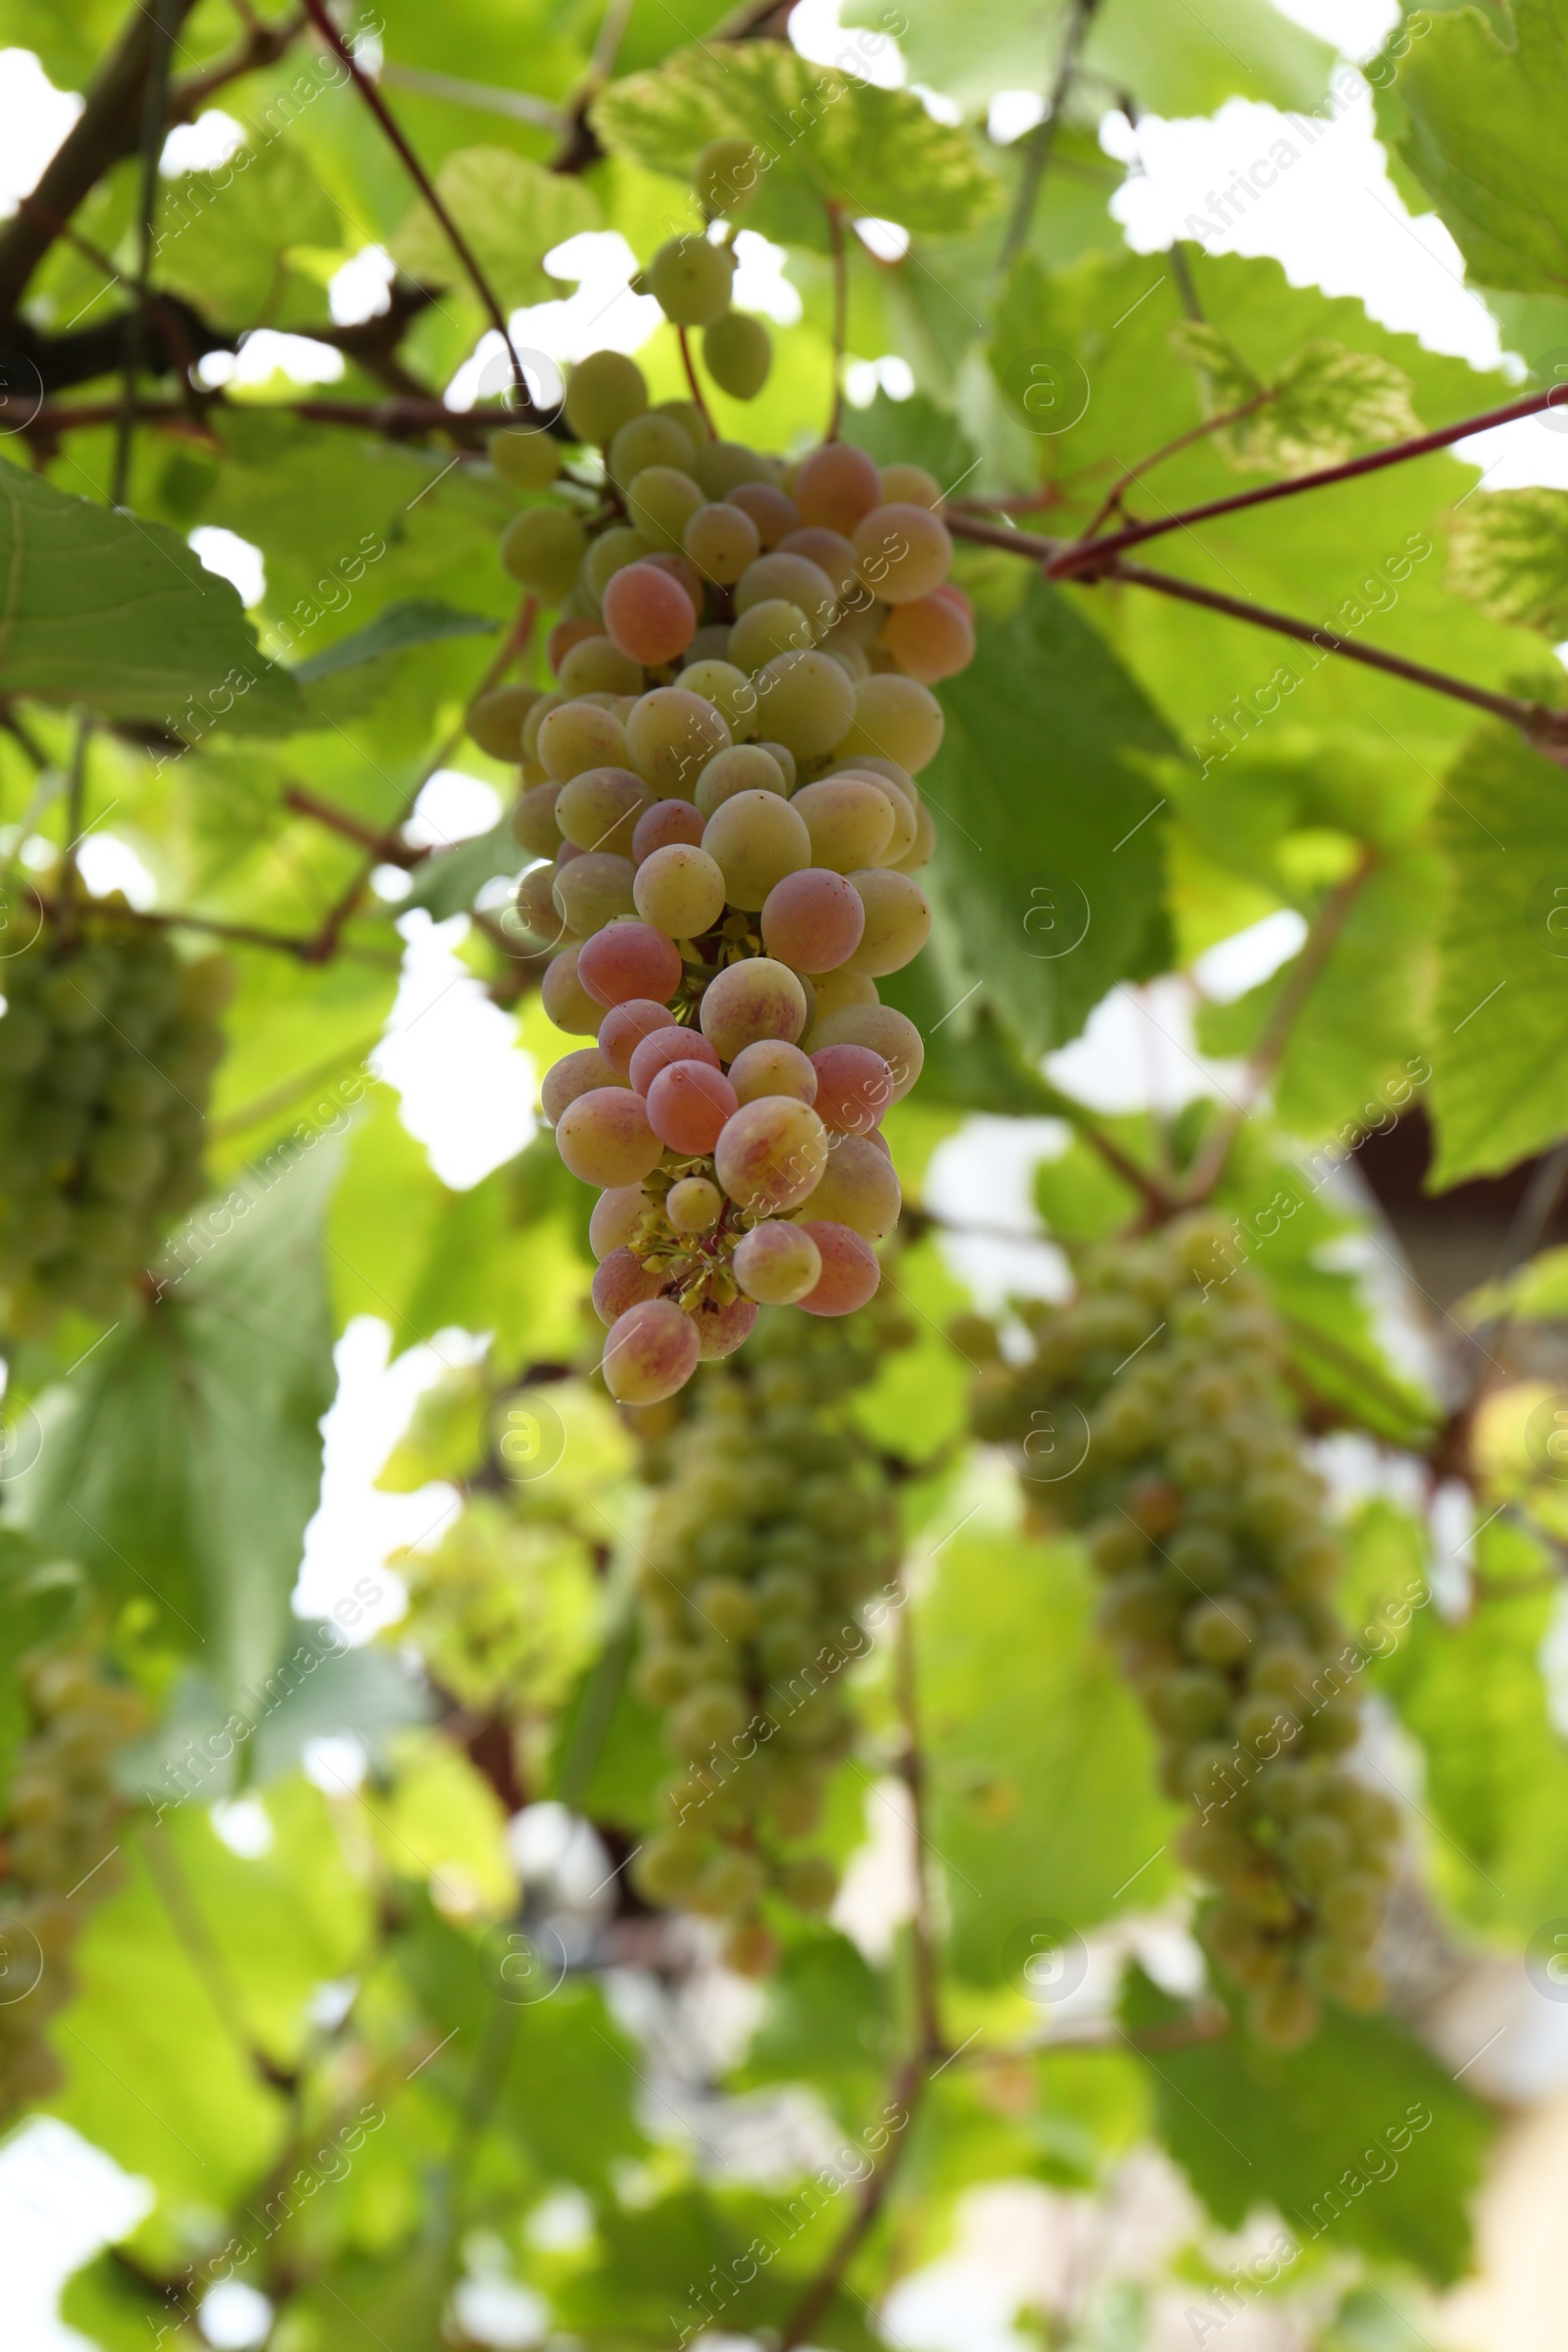 Photo of Ripe juicy grapes on branch growing in vineyard, low angle view